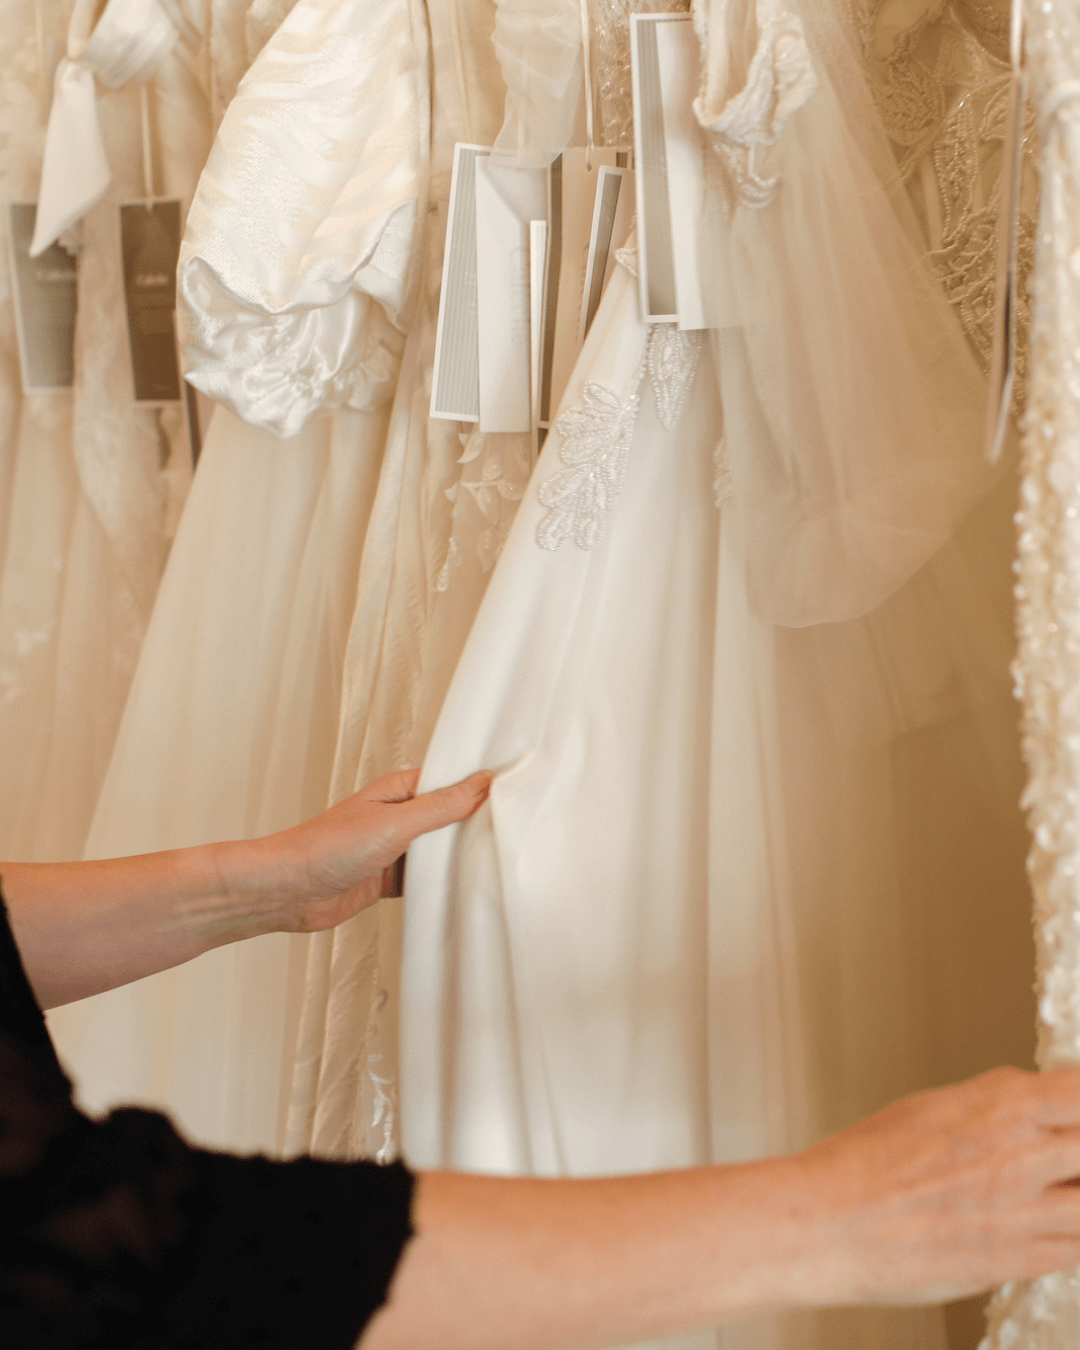 A guide to your wedding dress shopping experience